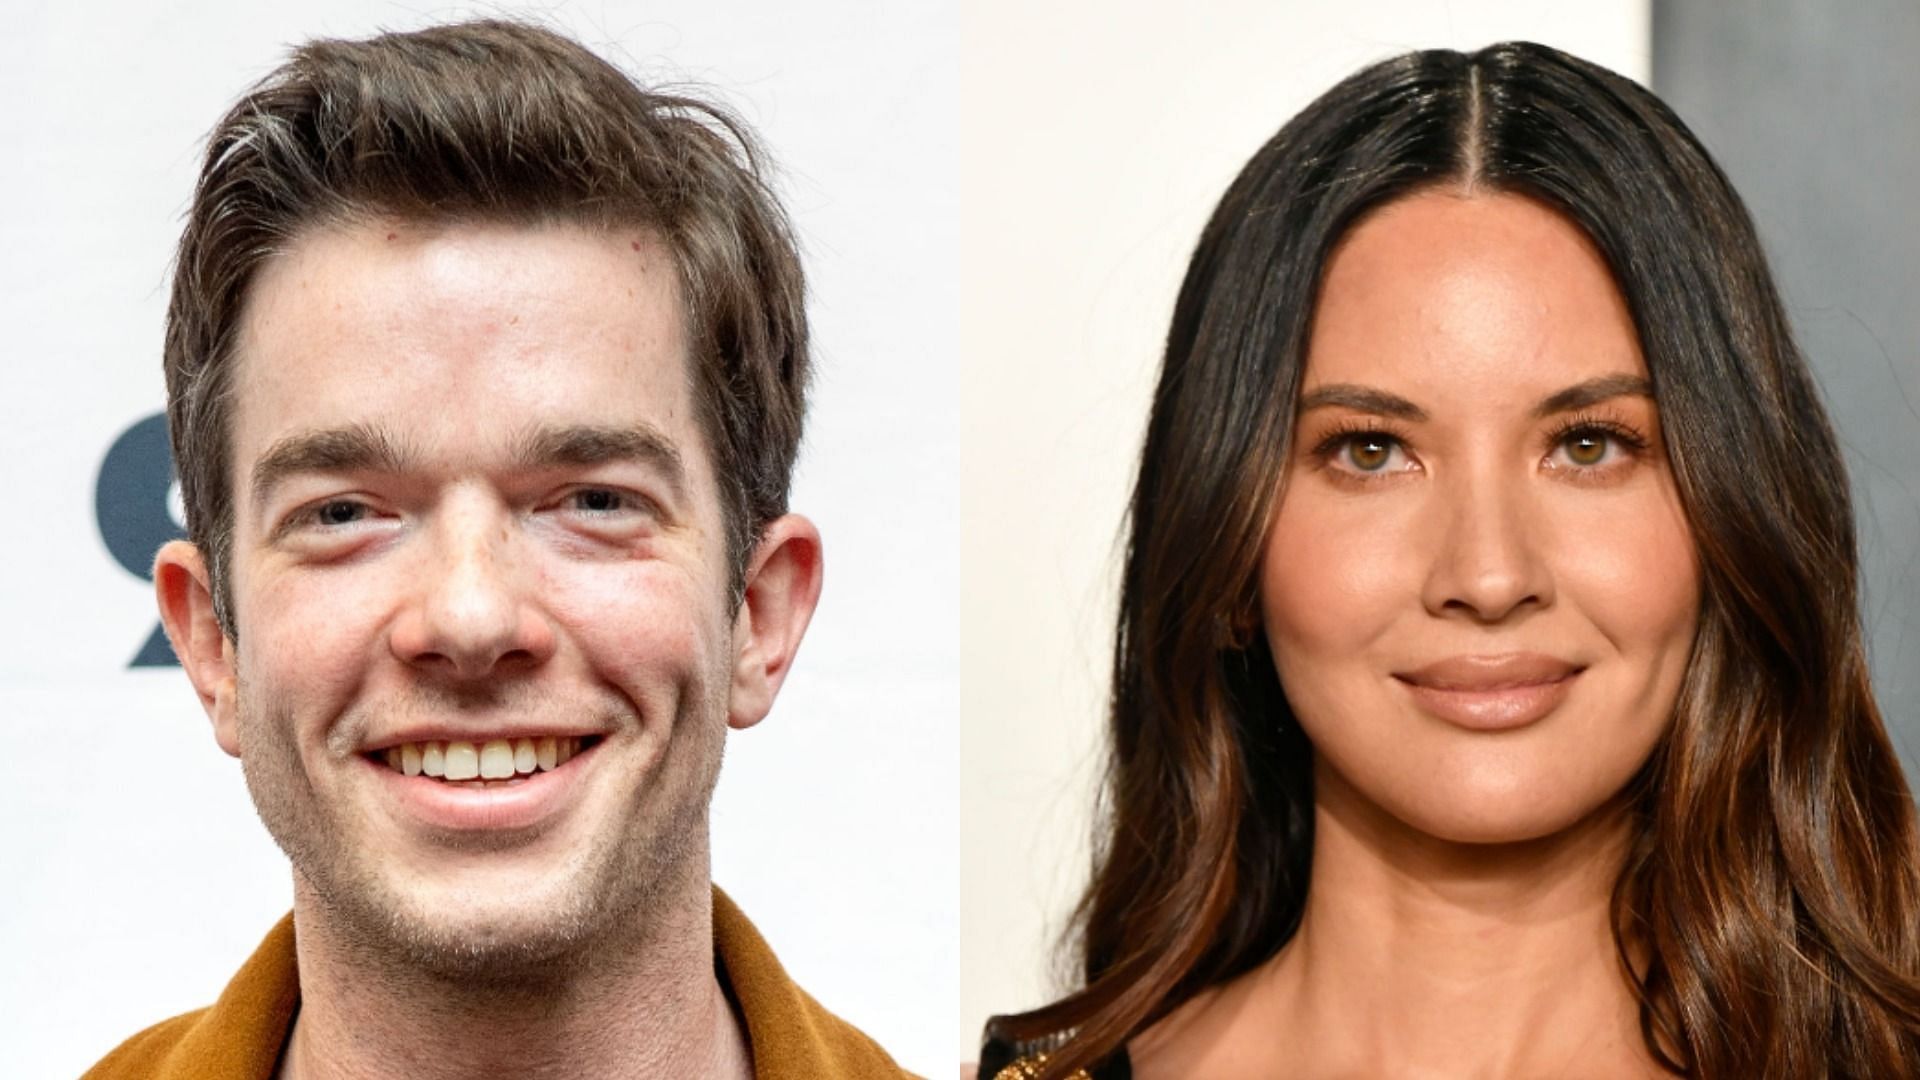 John Mulaney and Olivia Munn reportedly welcomed their first child together in November (Image via Roy Rochlin/Getty Images and Frazer Harrison/Getty Images)